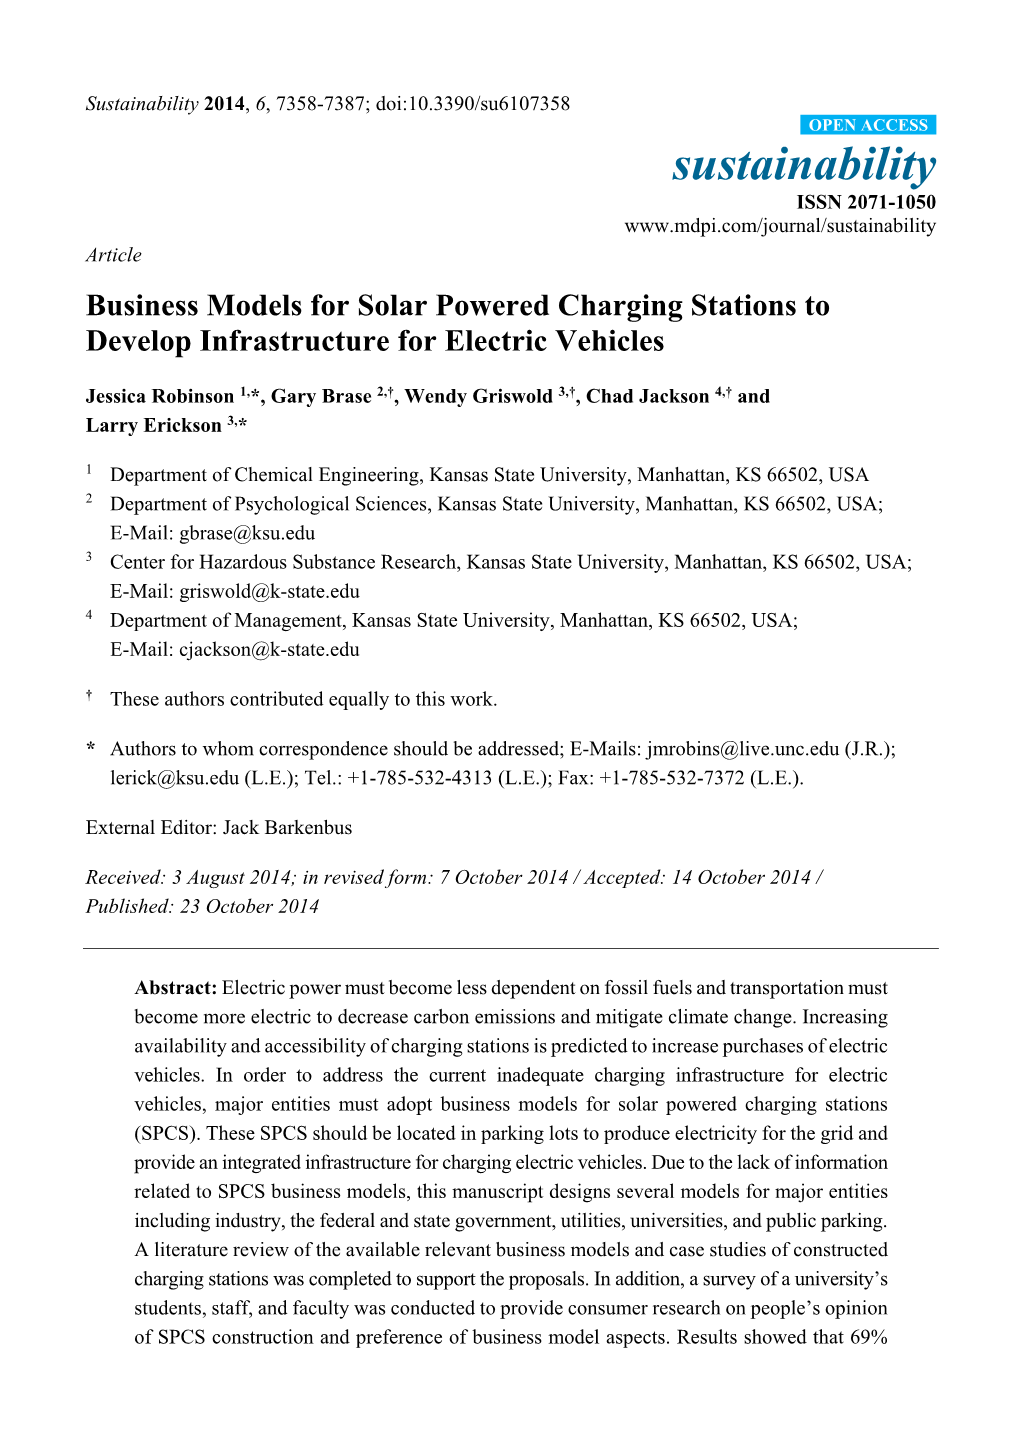 Business Models for Solar Powered Charging Stations to Develop Infrastructure for Electric Vehicles